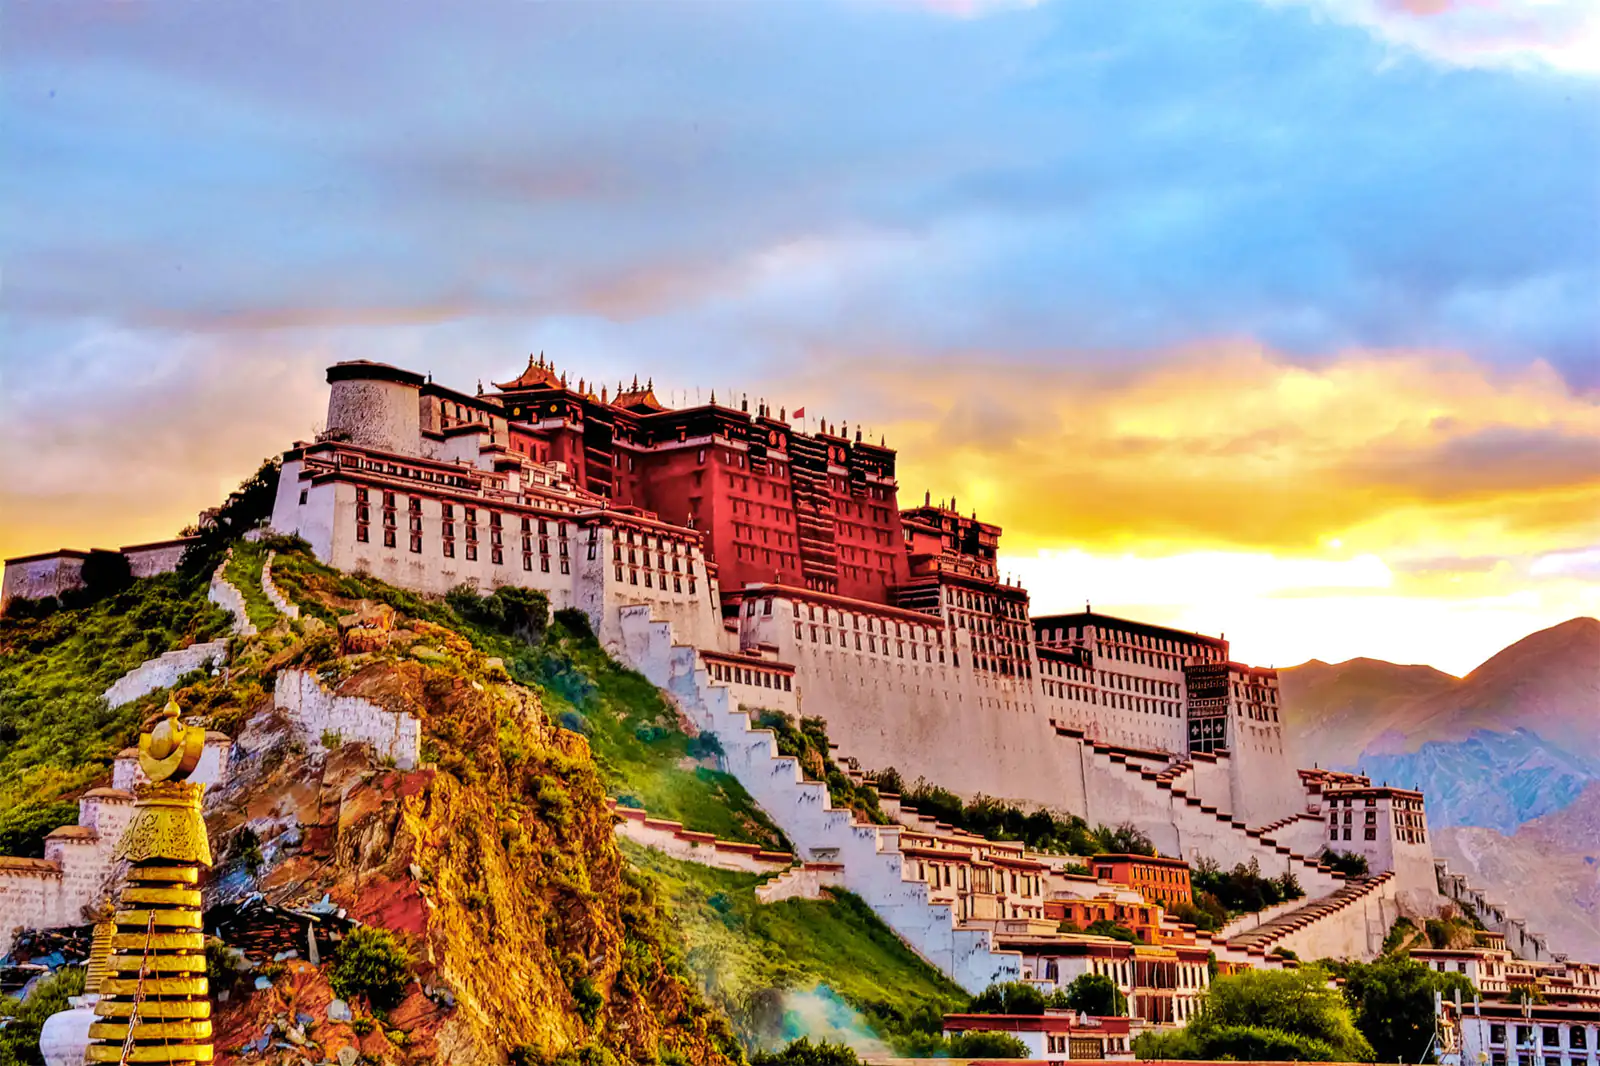 The Potala Palace in the light of dawn